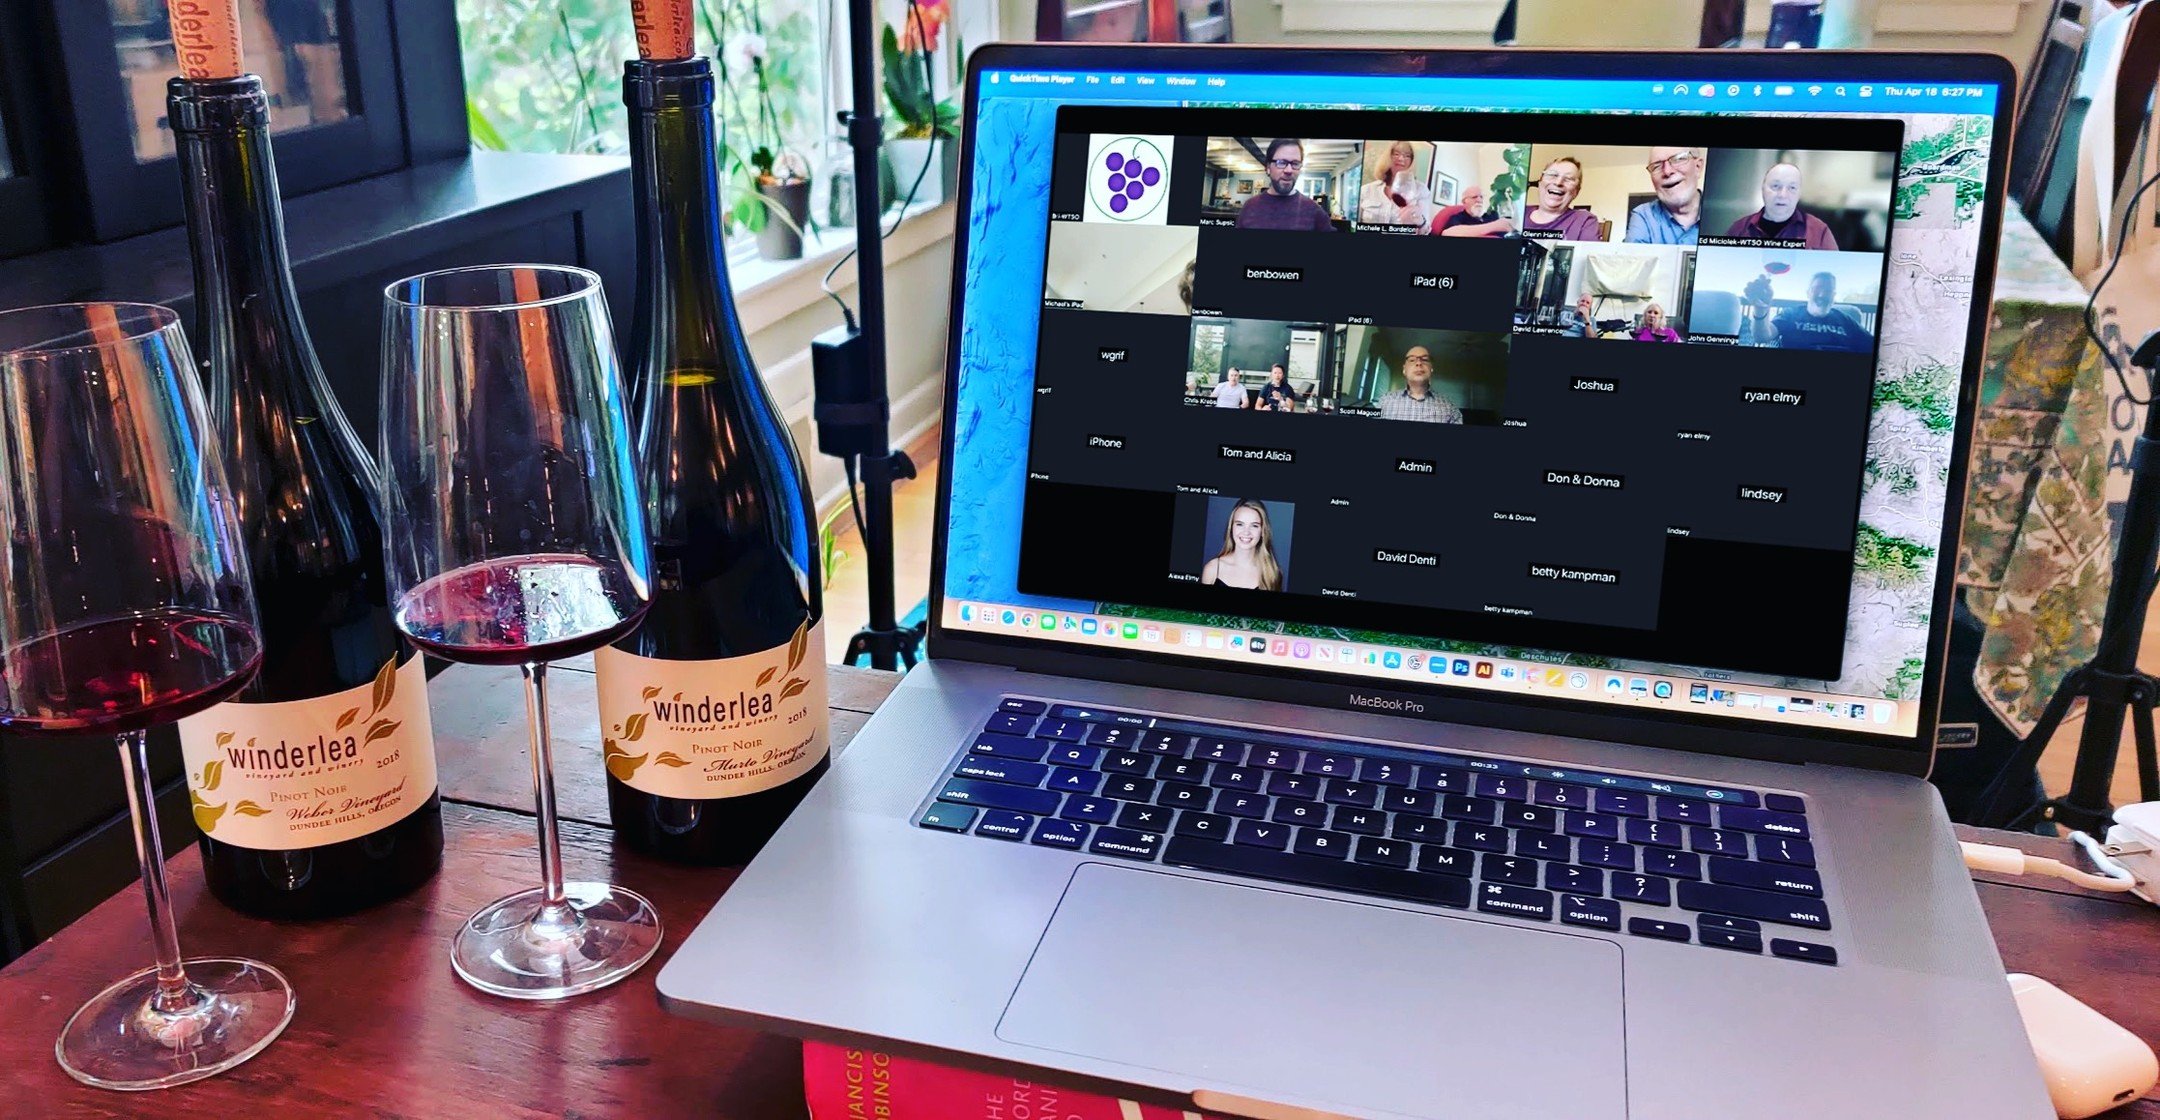 Thanks so much to everyone who attended Thursday's @wtso Virtual tasting! Those were some deee-licious Pinots from @winderlea Winery!

@i_heart_yin and I were doing double-duty that night, she was making a presentation on Acupuncture right before I j